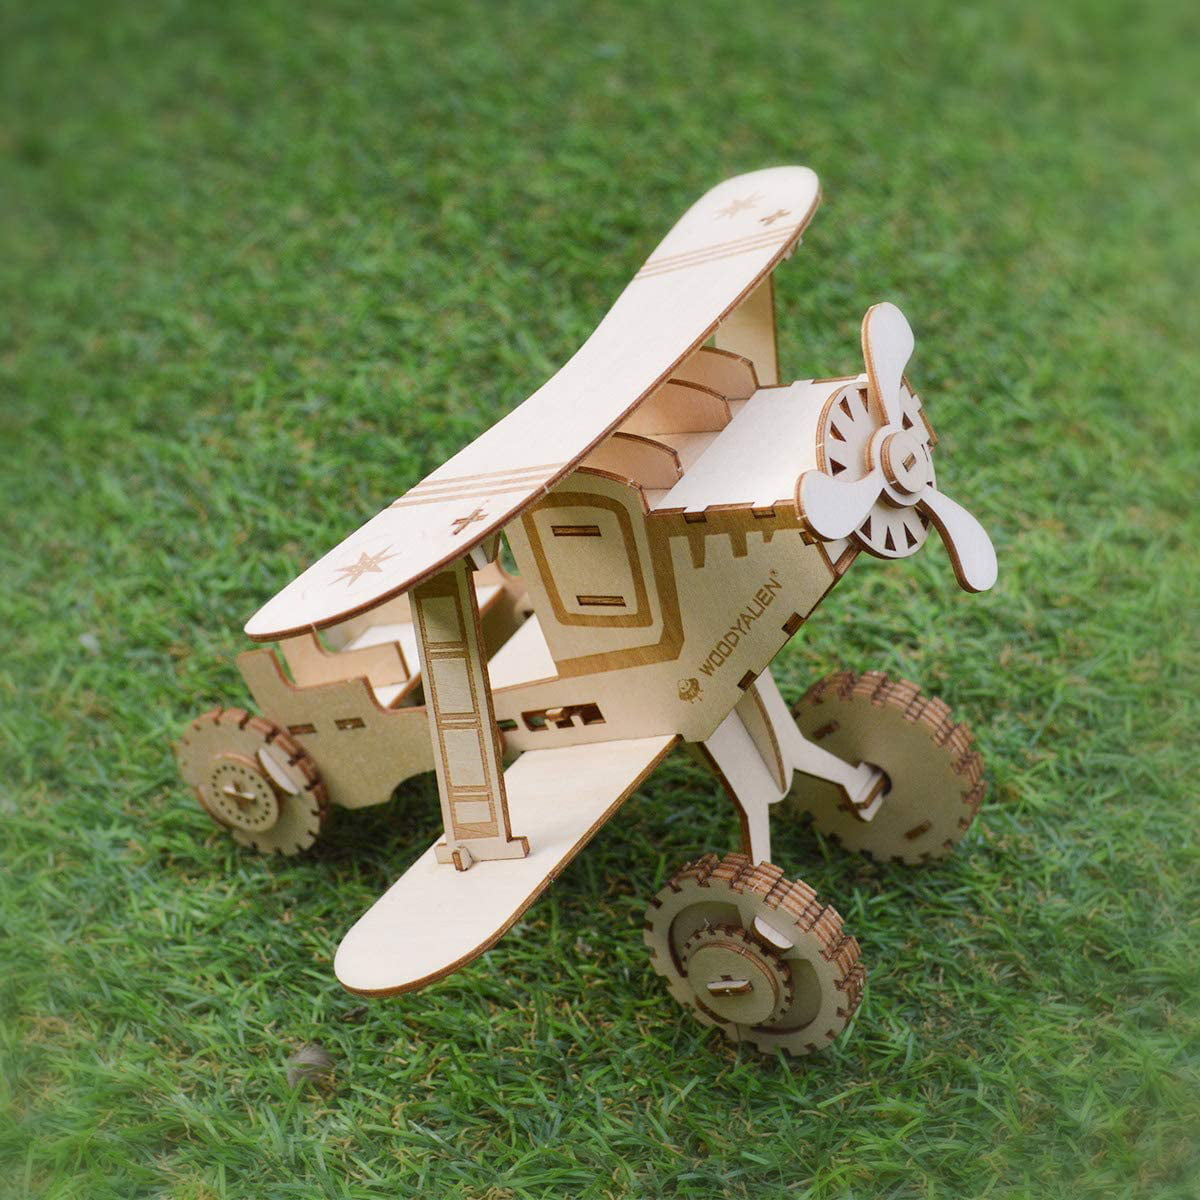 TOYMYTOY Wooden DIY Jigsaw Puzzle Plane Handmade Assemble Painting Model Toys for Kids Children Wood Color 